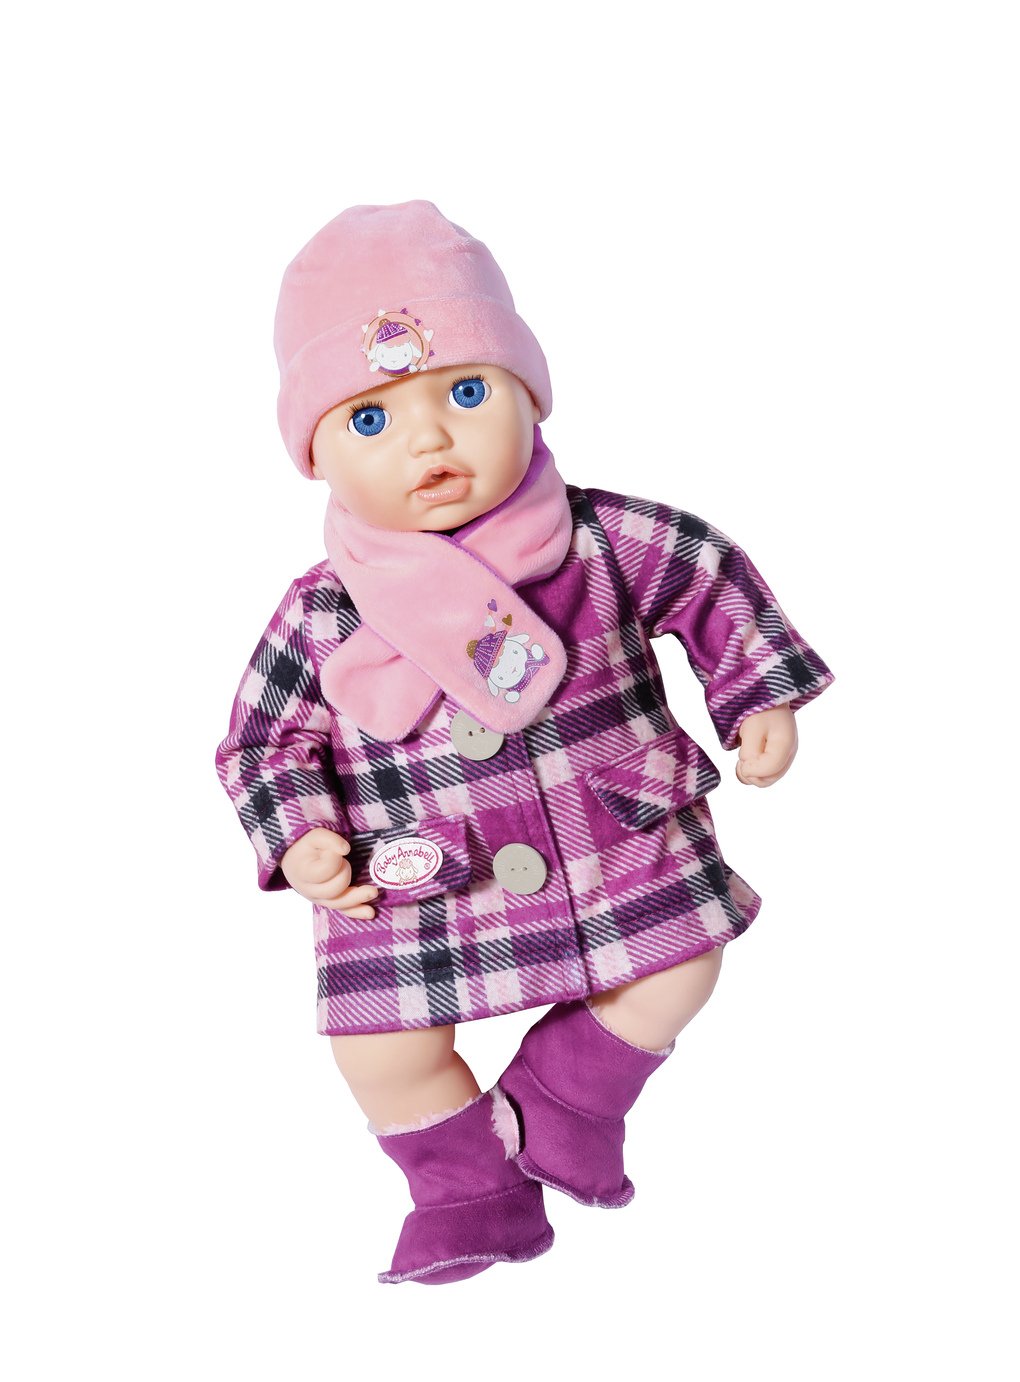 Baby Annabell Deluxe Coat Set Review